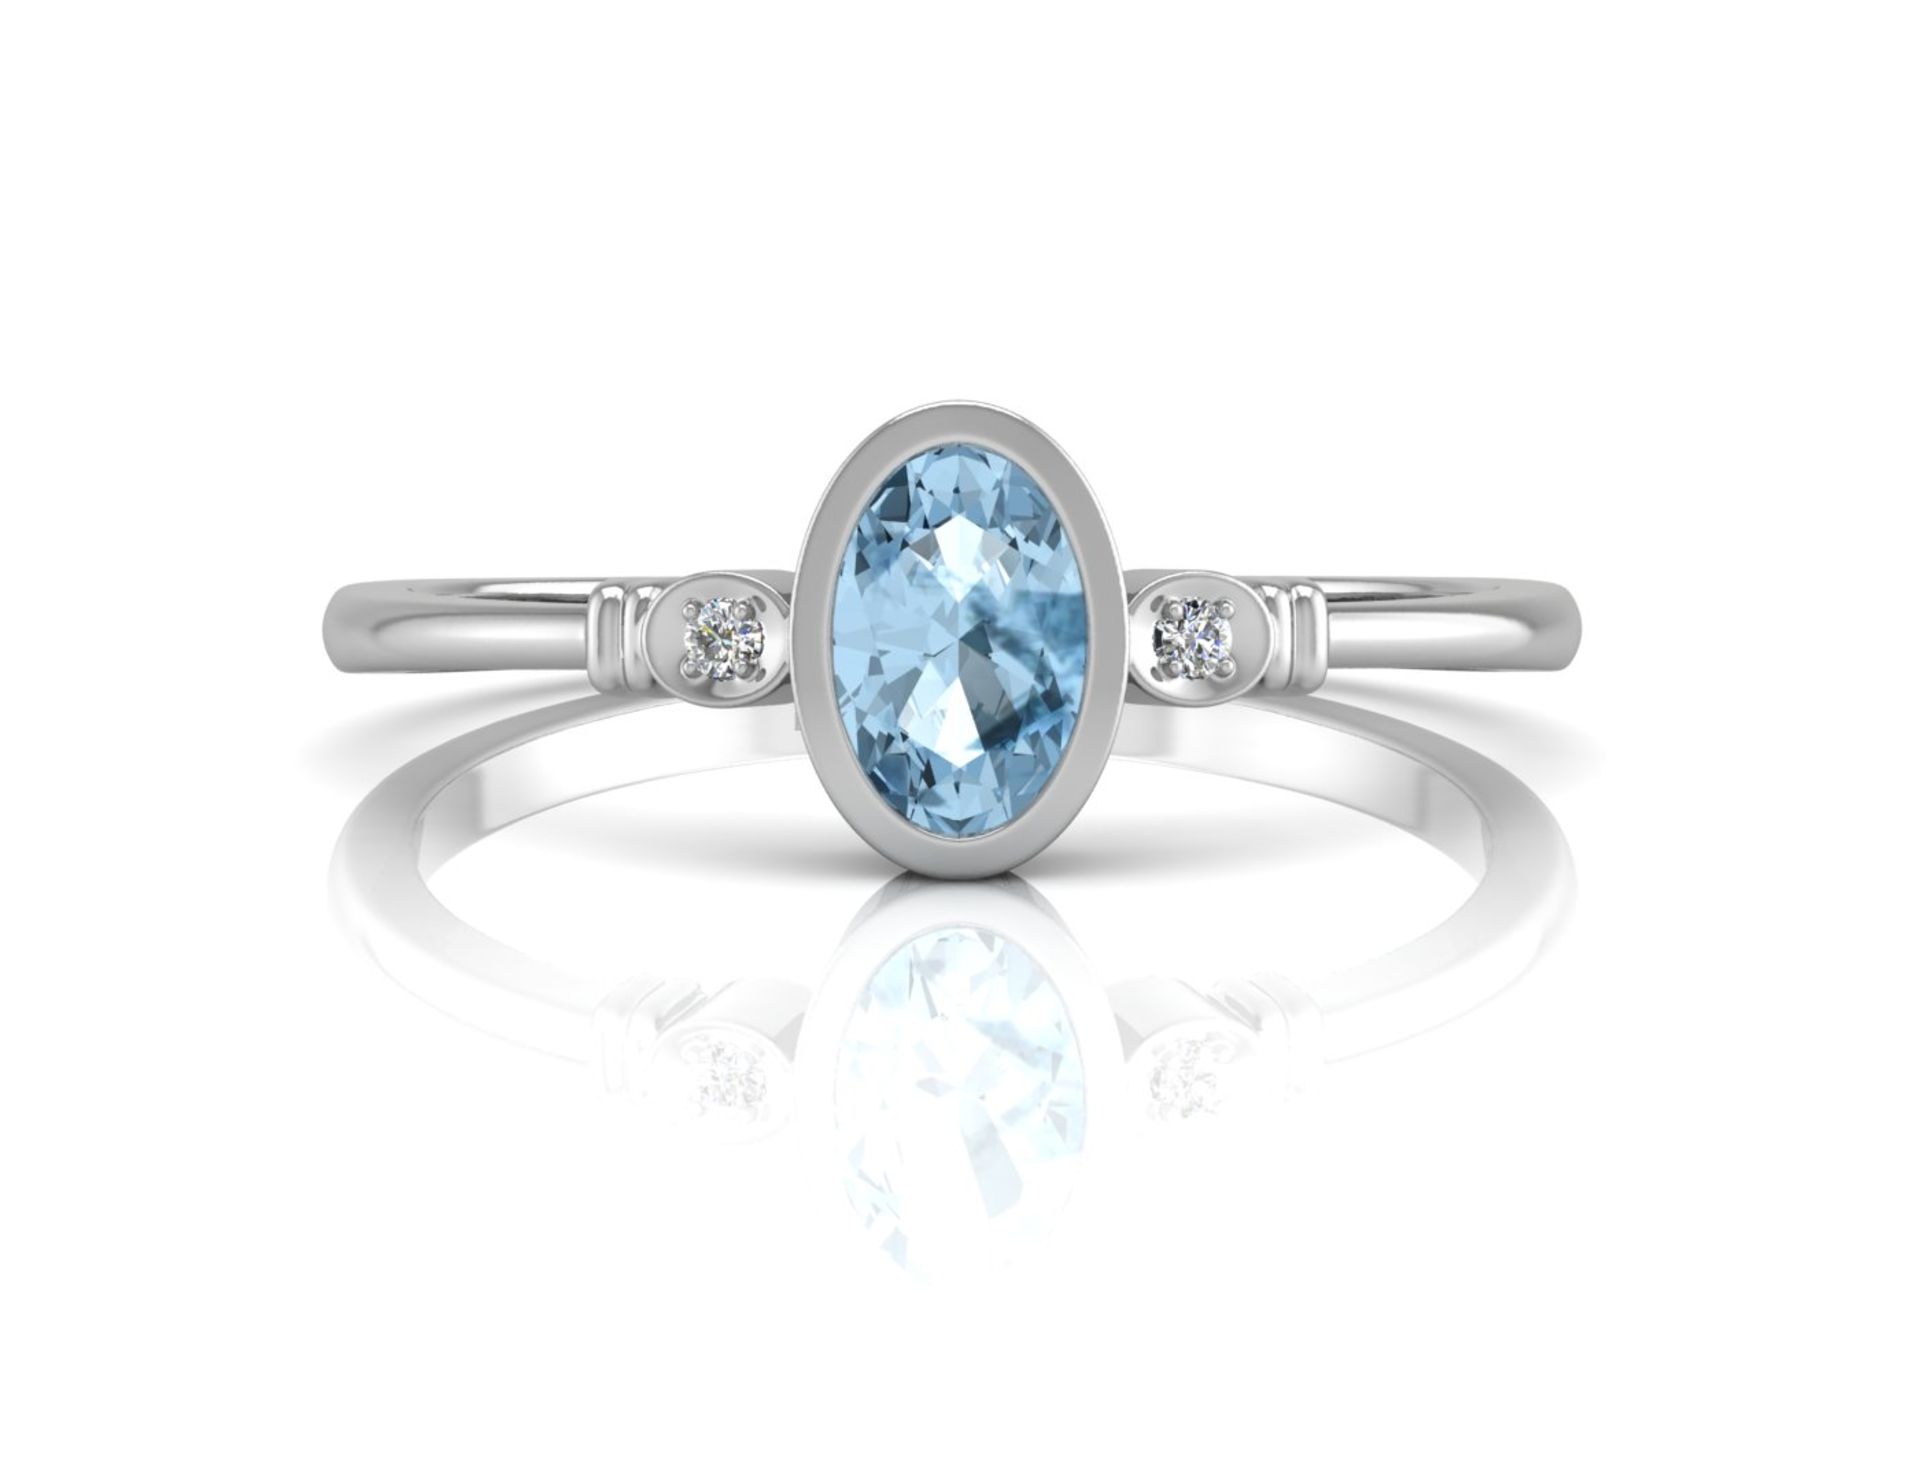 9ct White Gold Diamond And Oval Shape Blue Topaz Ring - Valued By IDI £1,225.00 - This stunning ring - Image 4 of 5